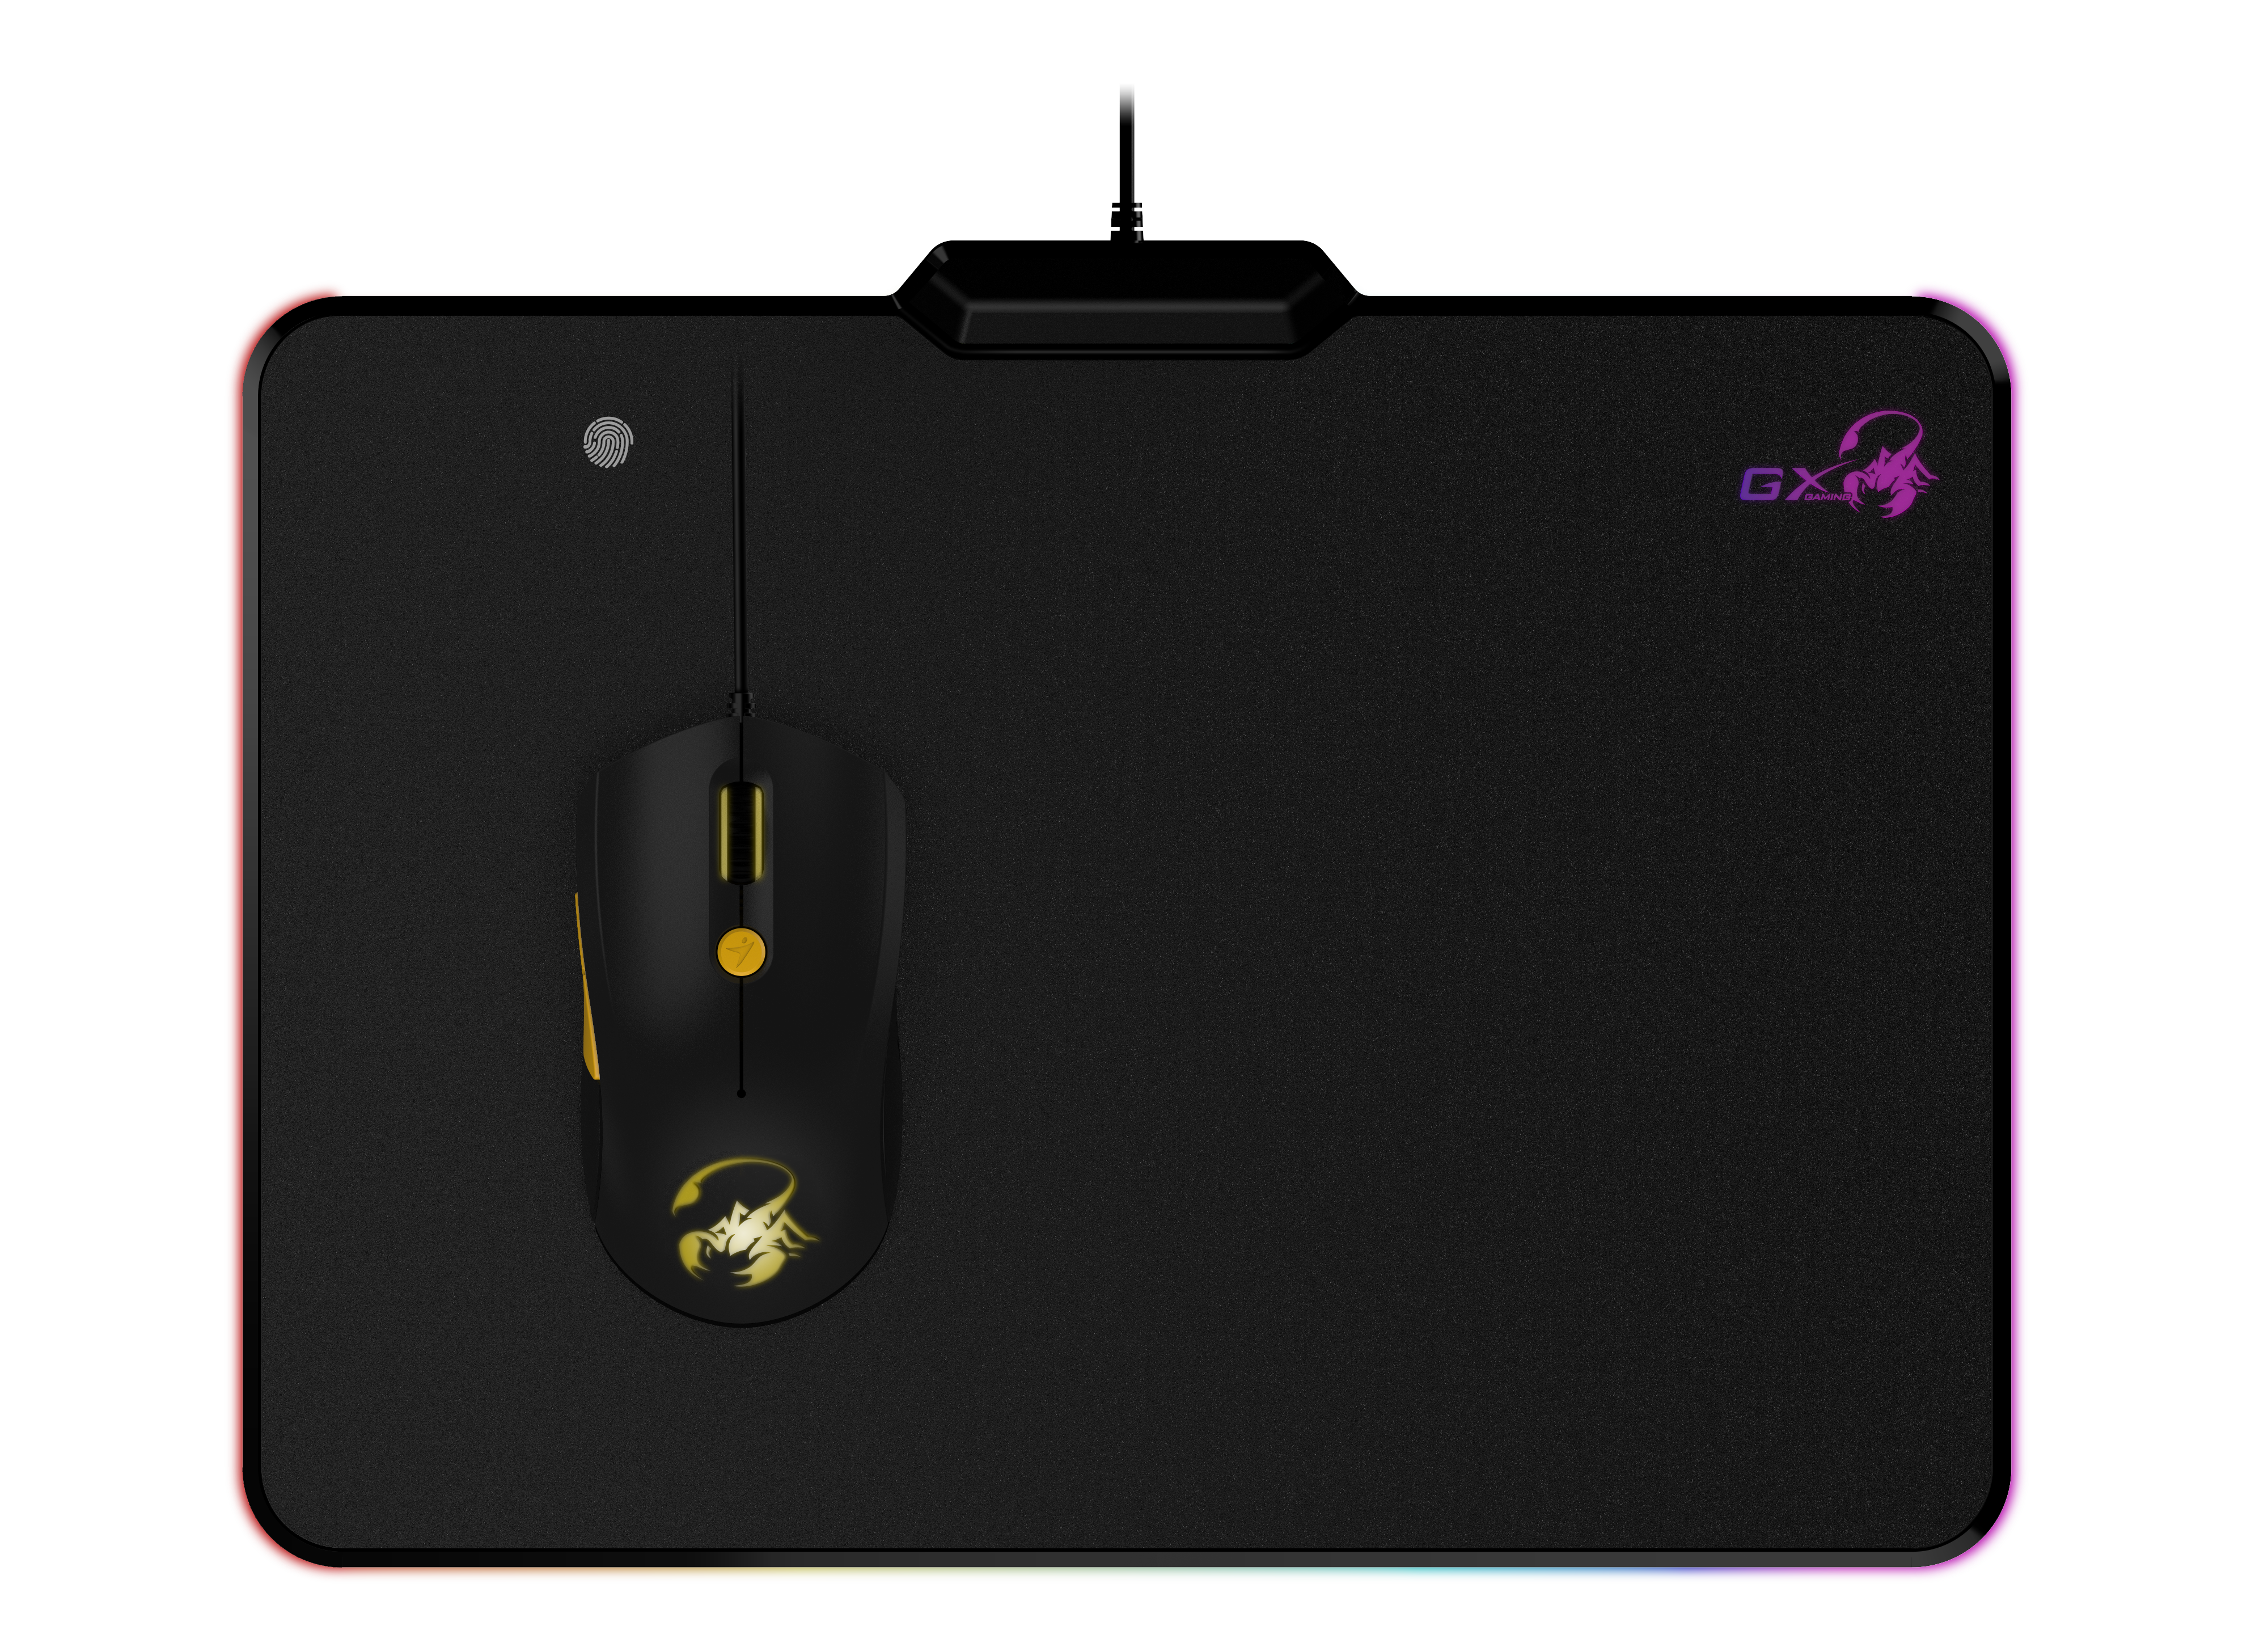 Wholesale gx mouse pad : gx-p500 hard low friction mousepad with rgb lighting for effortless speed and accuracy